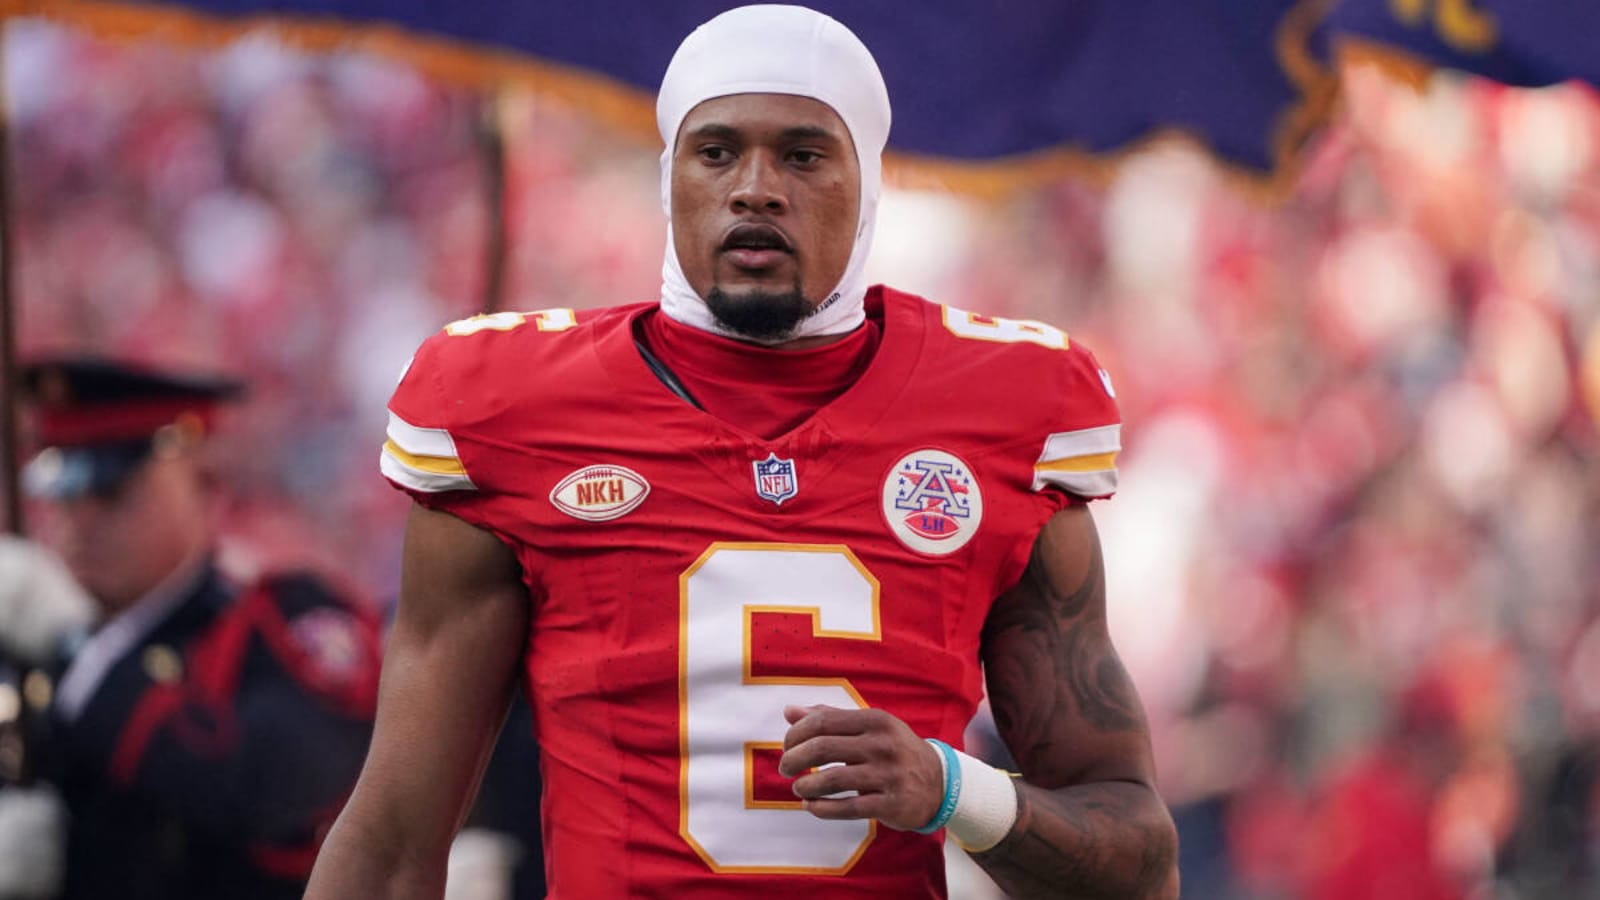 Chiefs defender carted off after freak ankle injury vs. Packers